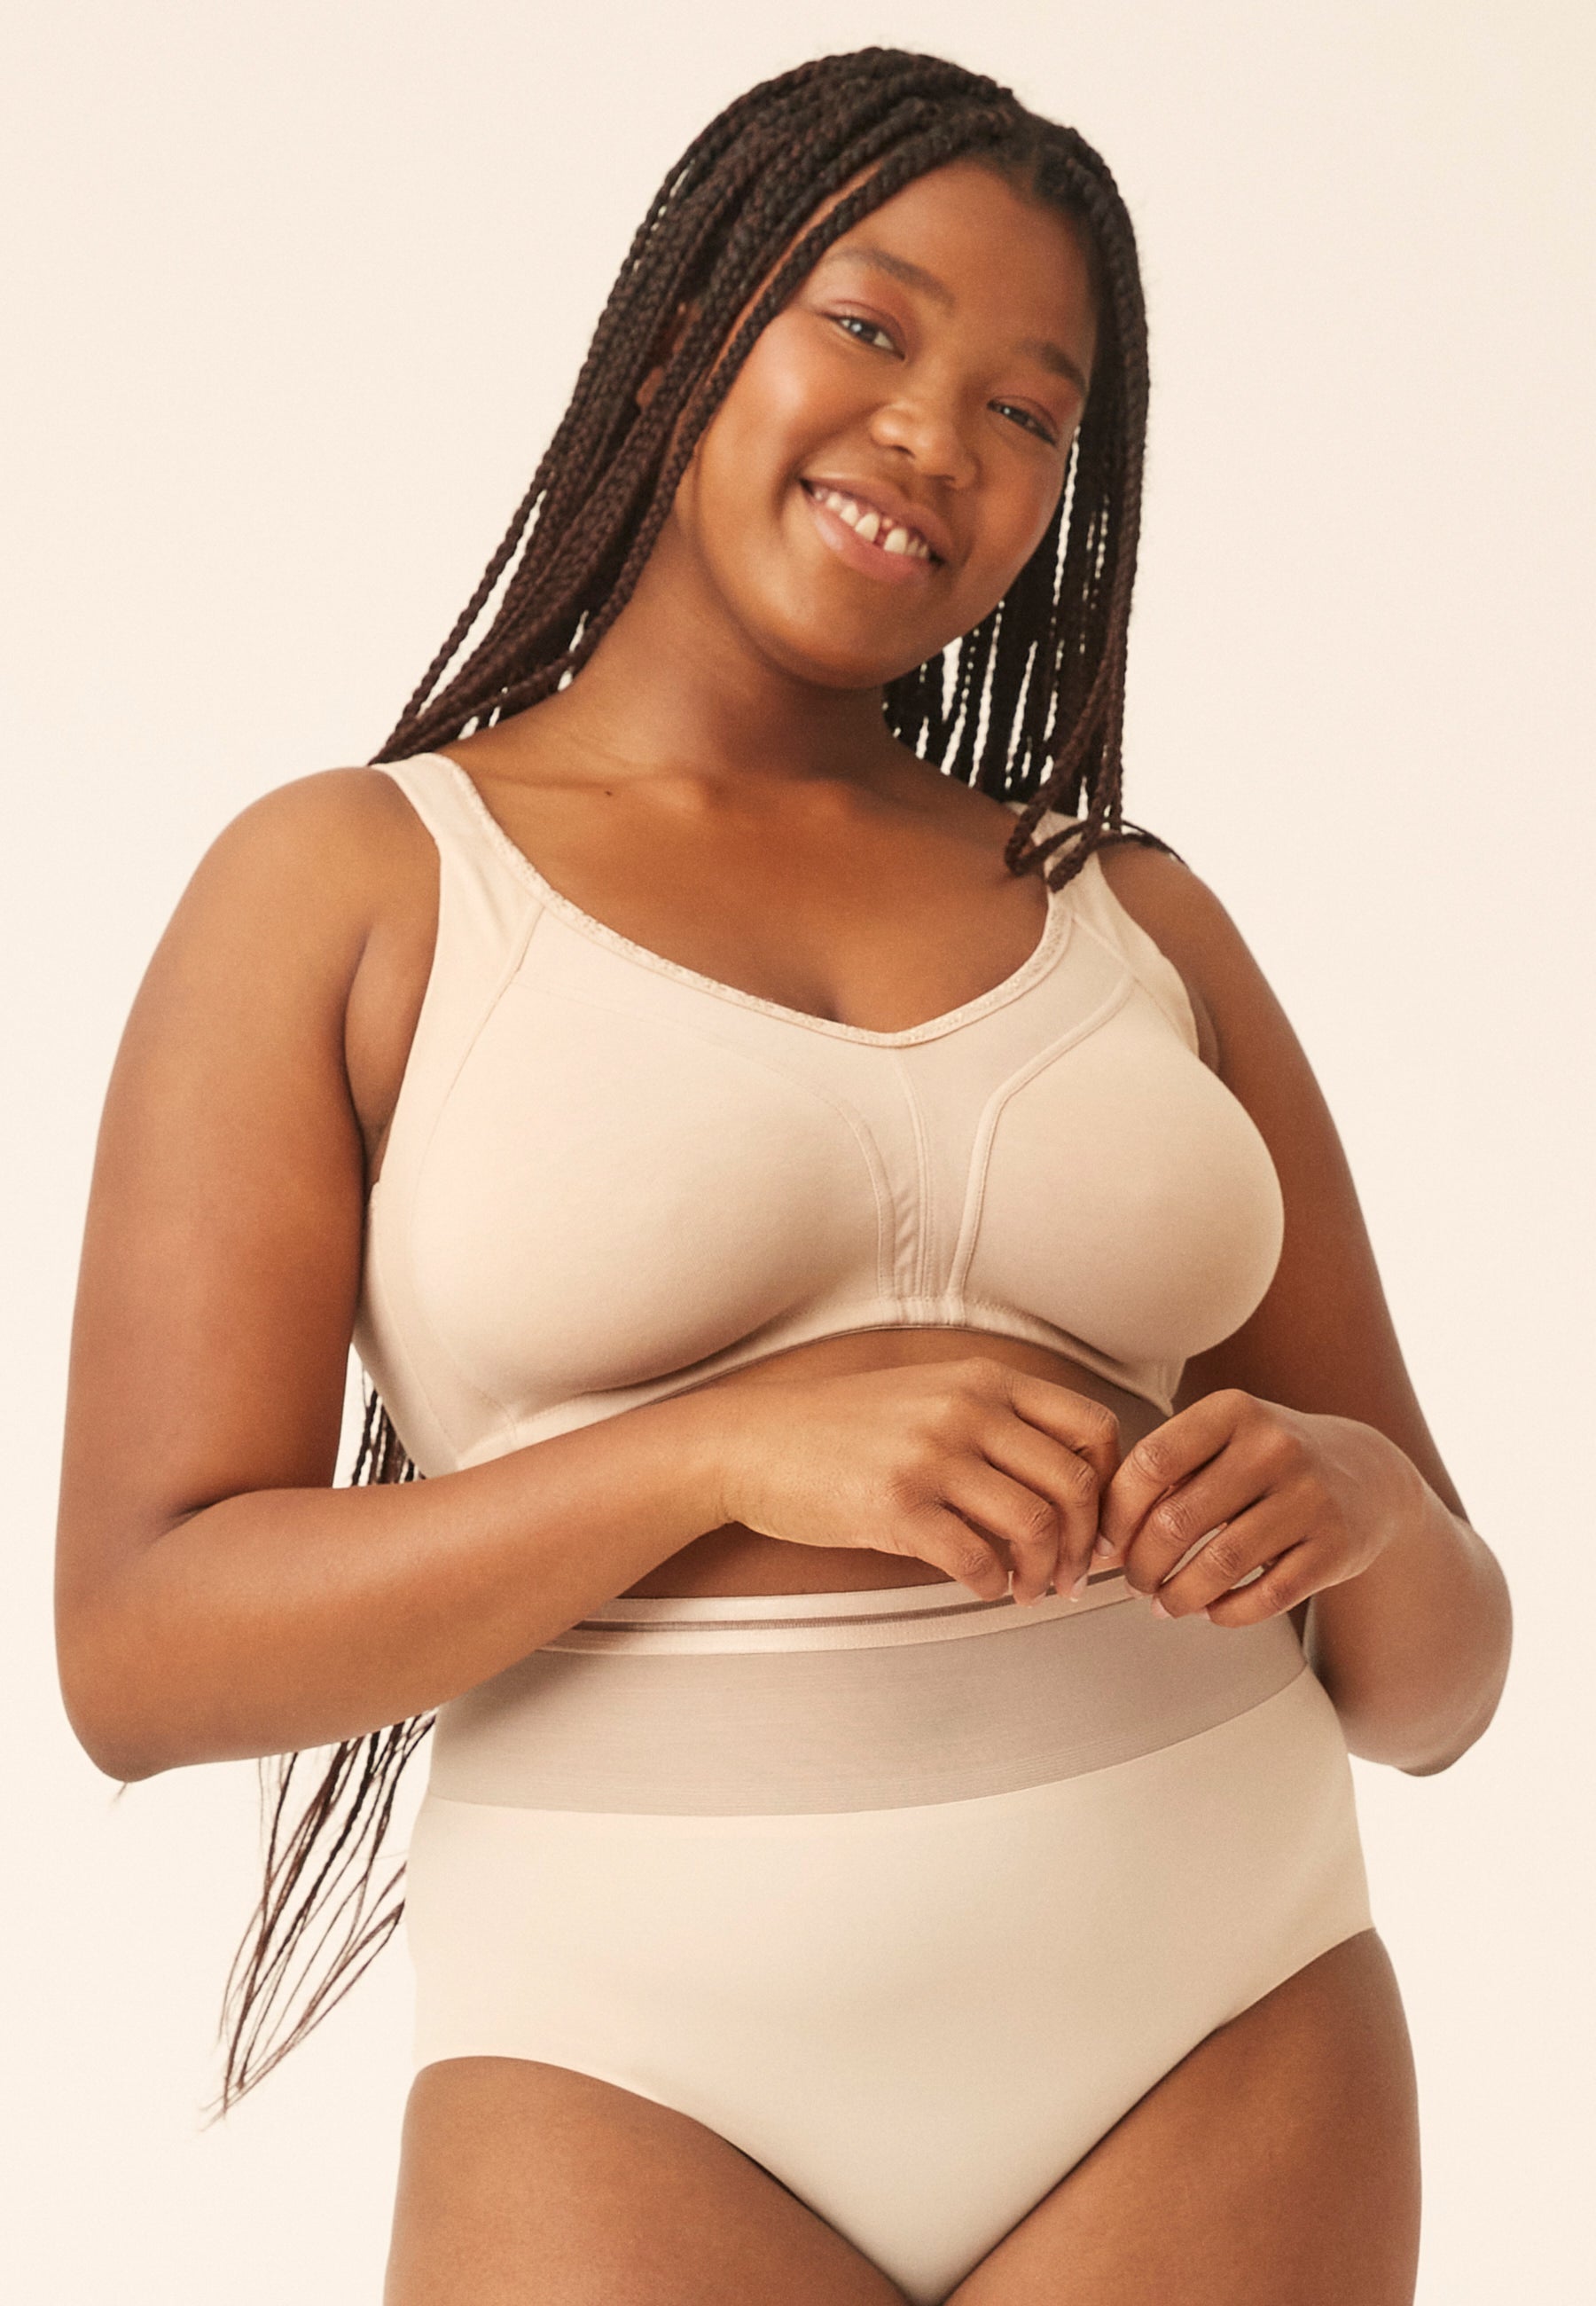 Bestselling bras for every type of woman - NATURANA